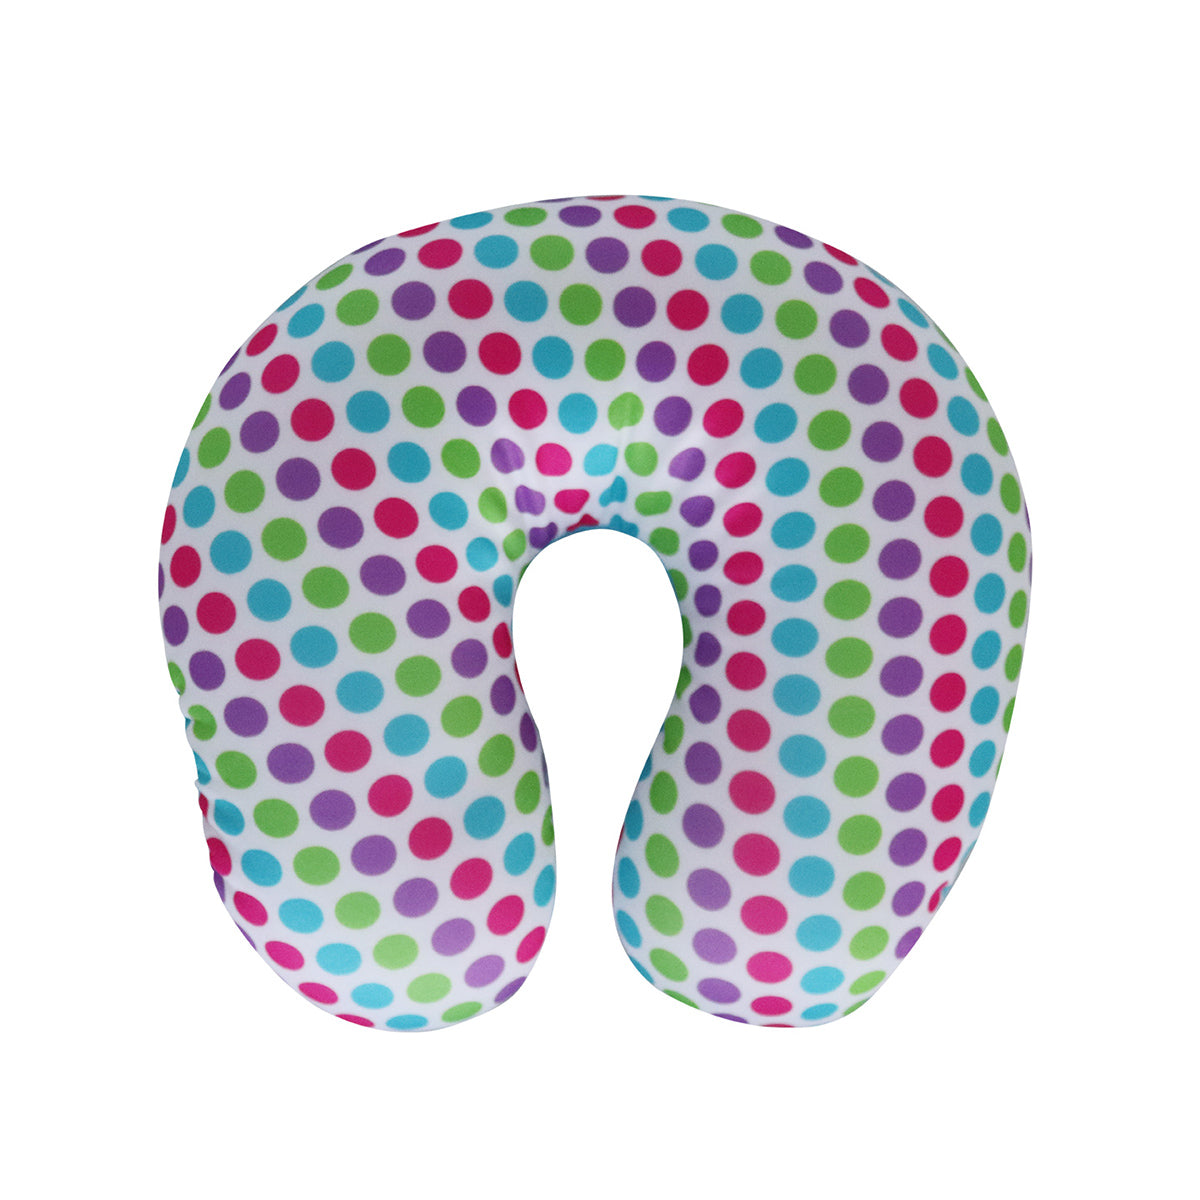 Snuggletime Toddler Microbead Support Neck Cushion